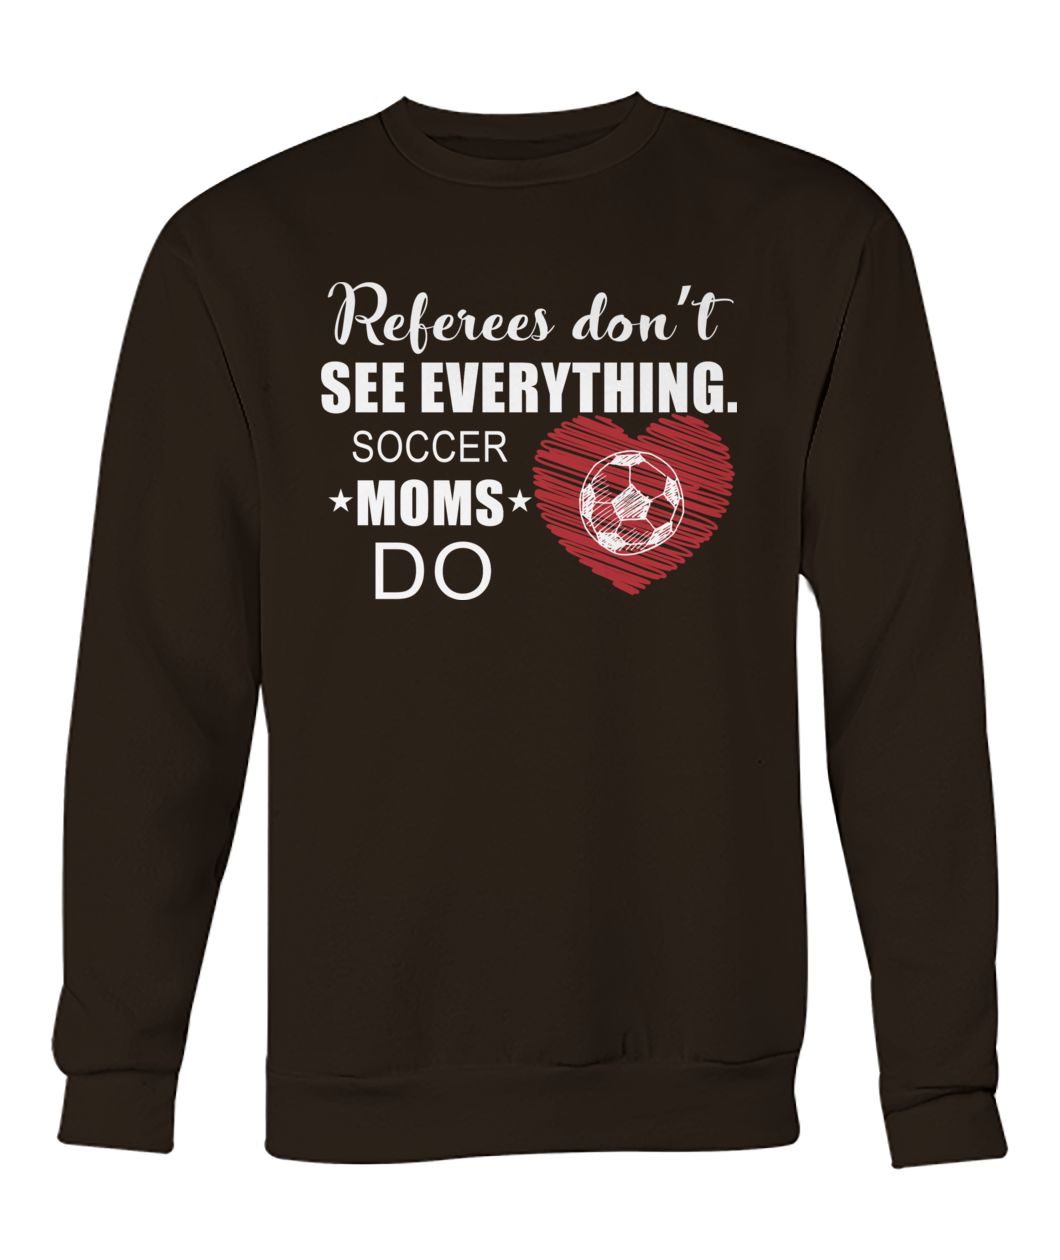 Referees don't see everything soccer moms do crew neck sweatshirt